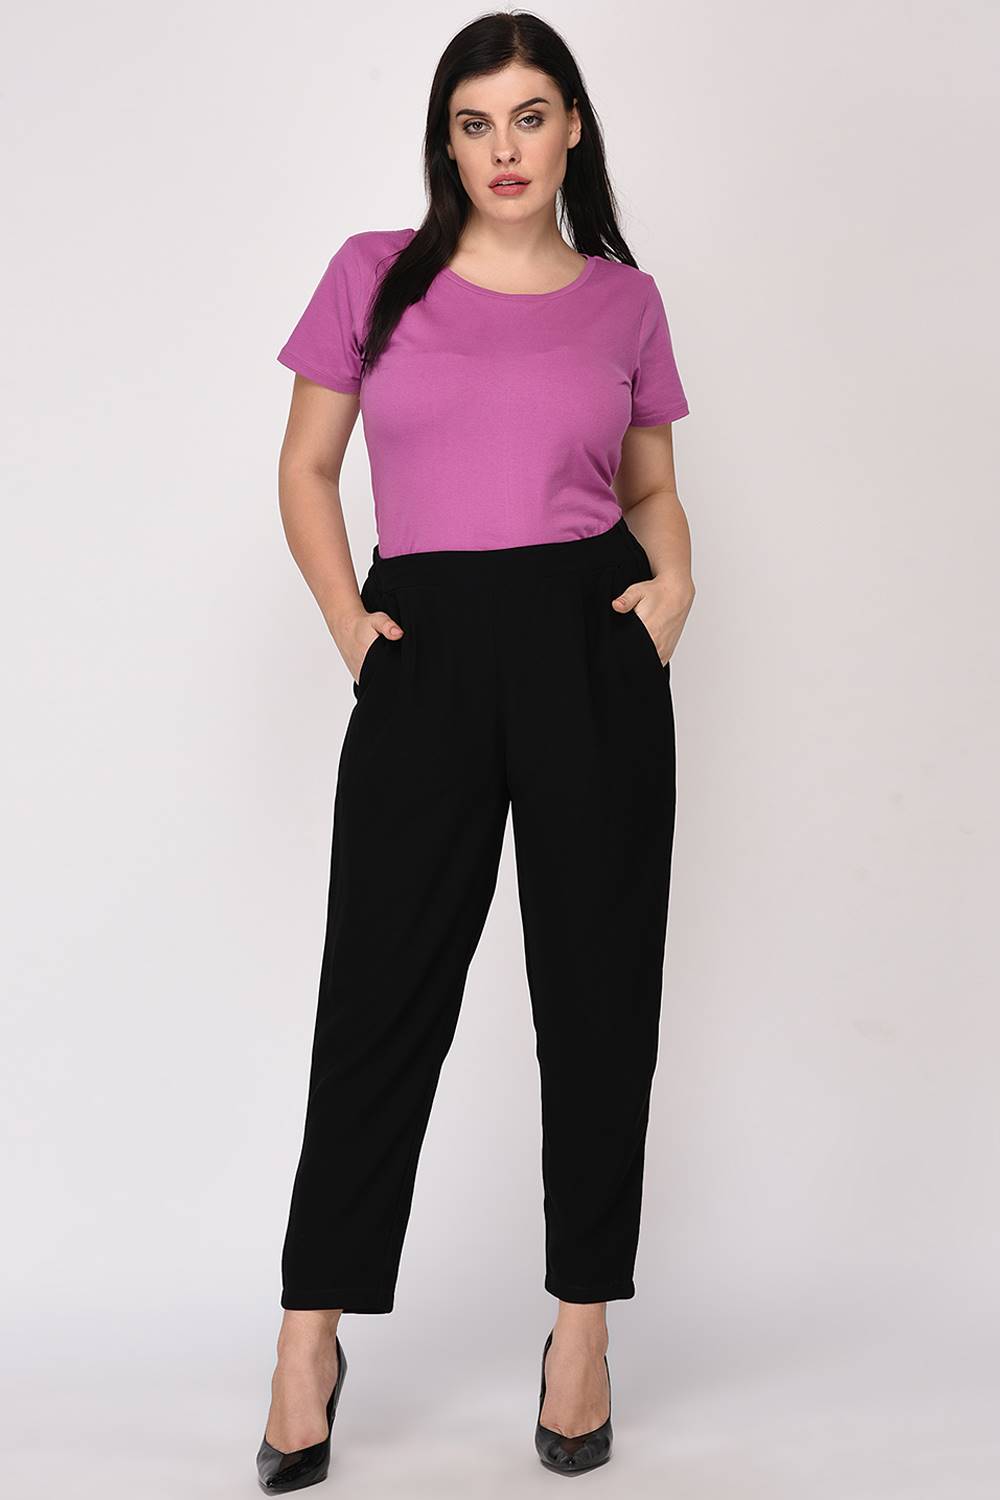 PullOn Flared Trouser Pants In Plus Size SculptHer Collection  Black  Black  NYDJ